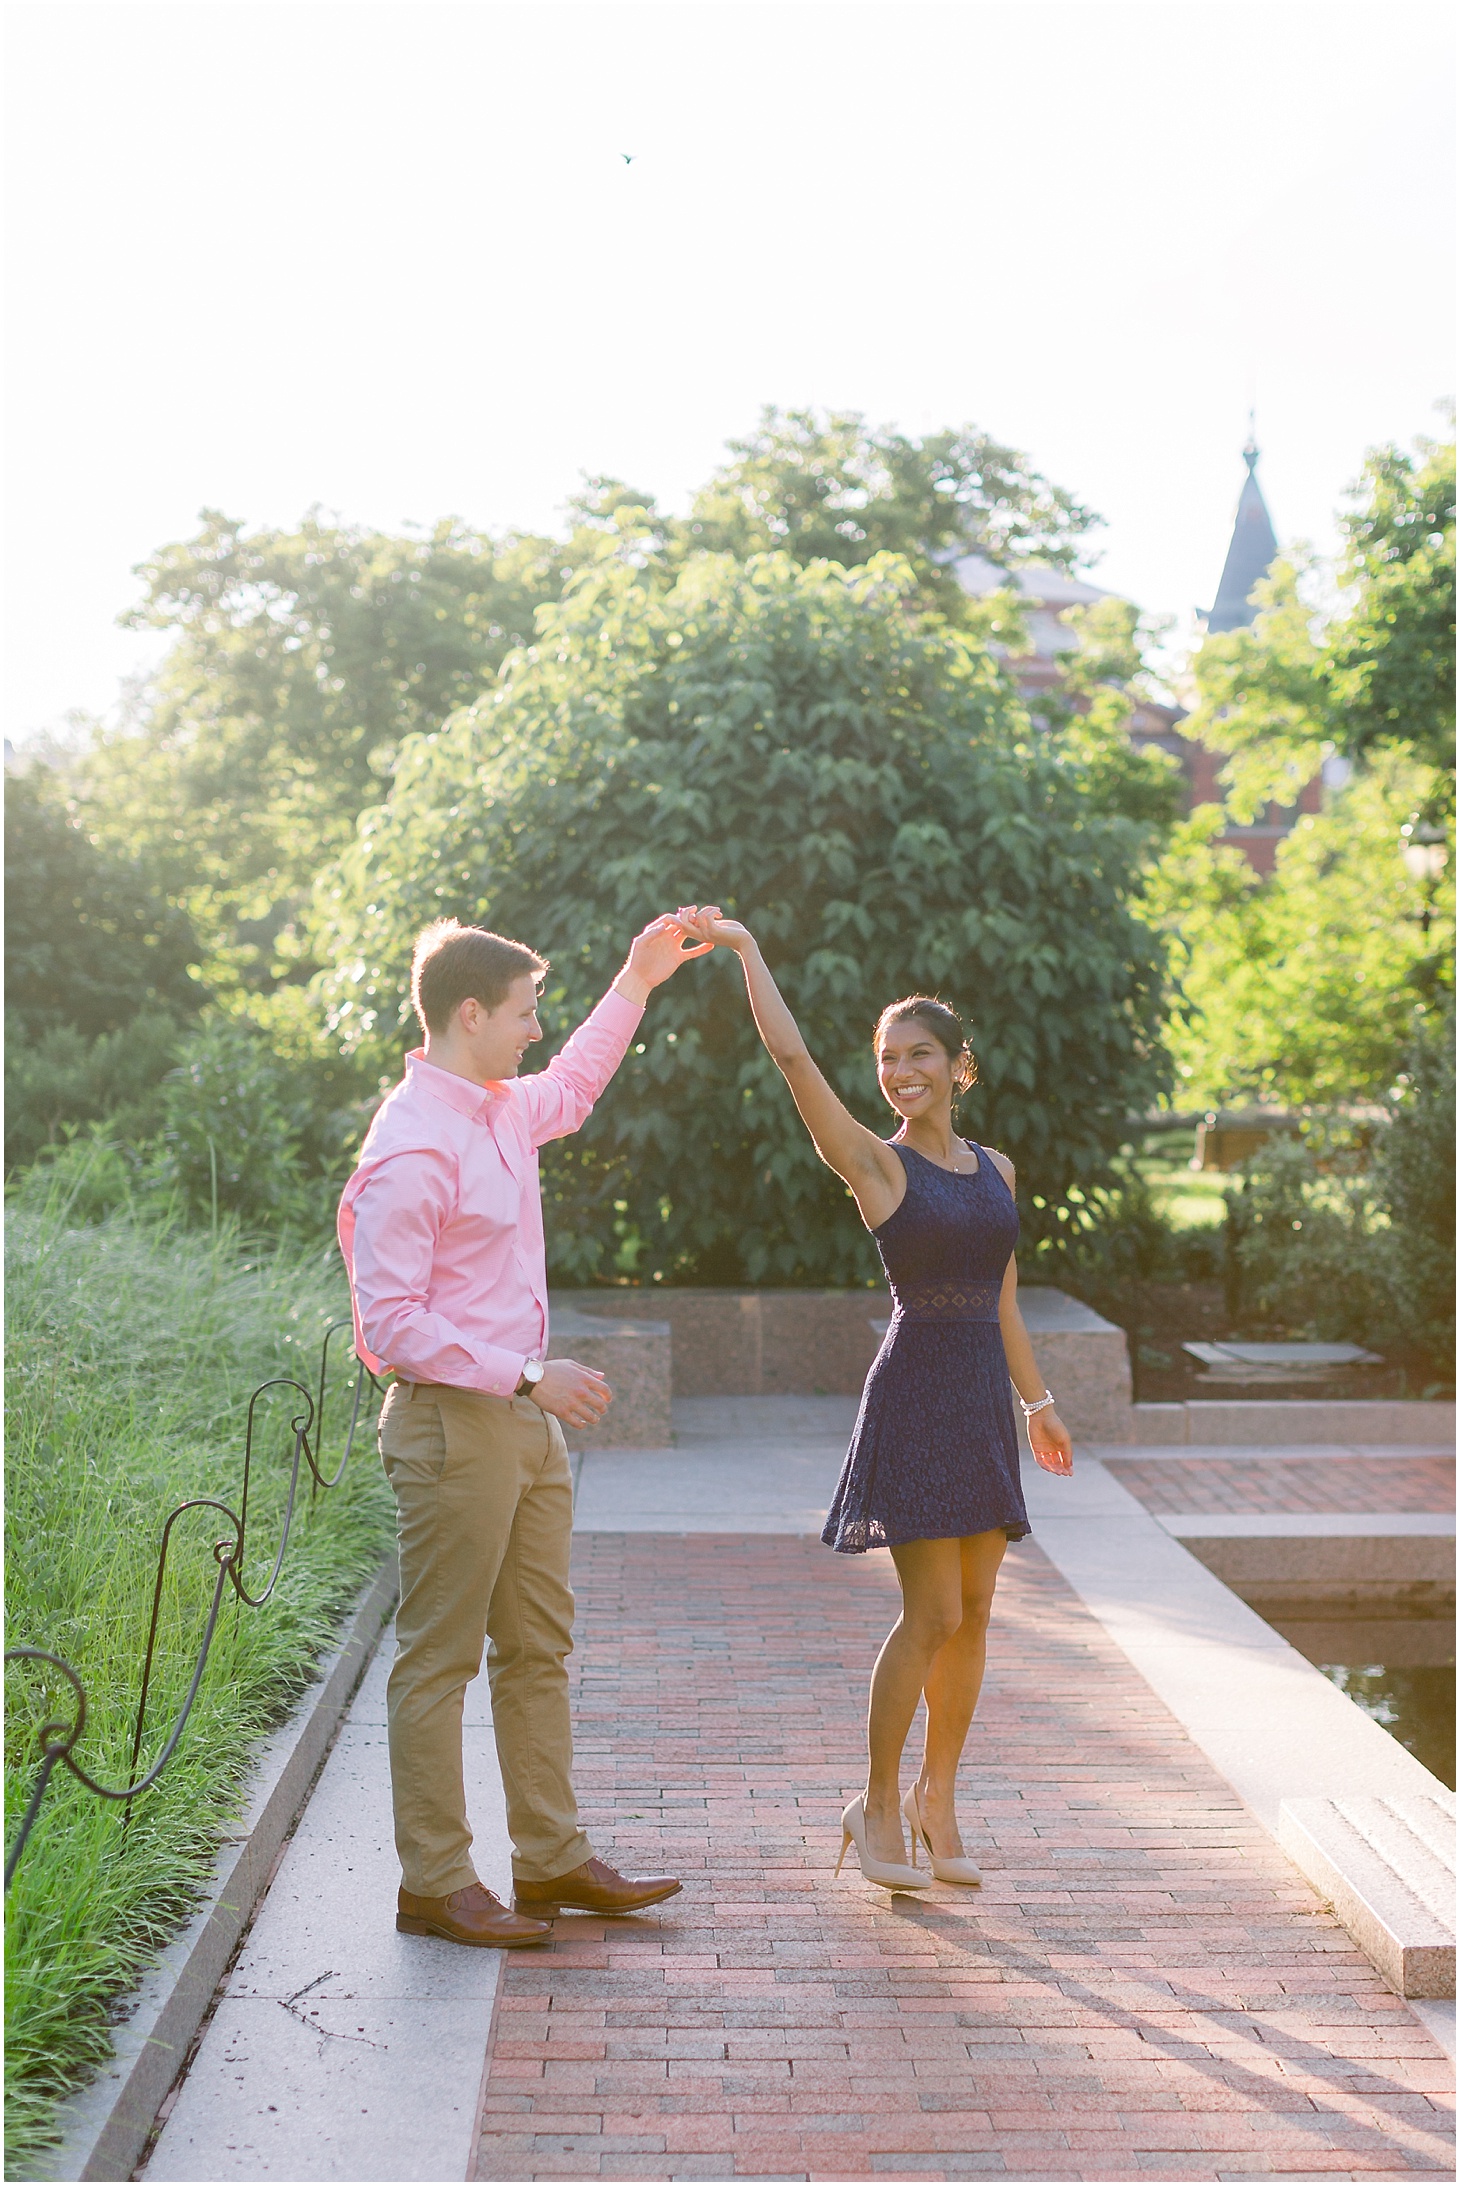 Engagement Portraits at the National Mall in Washington, DC | Sunrise Engagement Session at the Lincoln Memorial Reflecting Pool | Sarah Bradshaw Photography